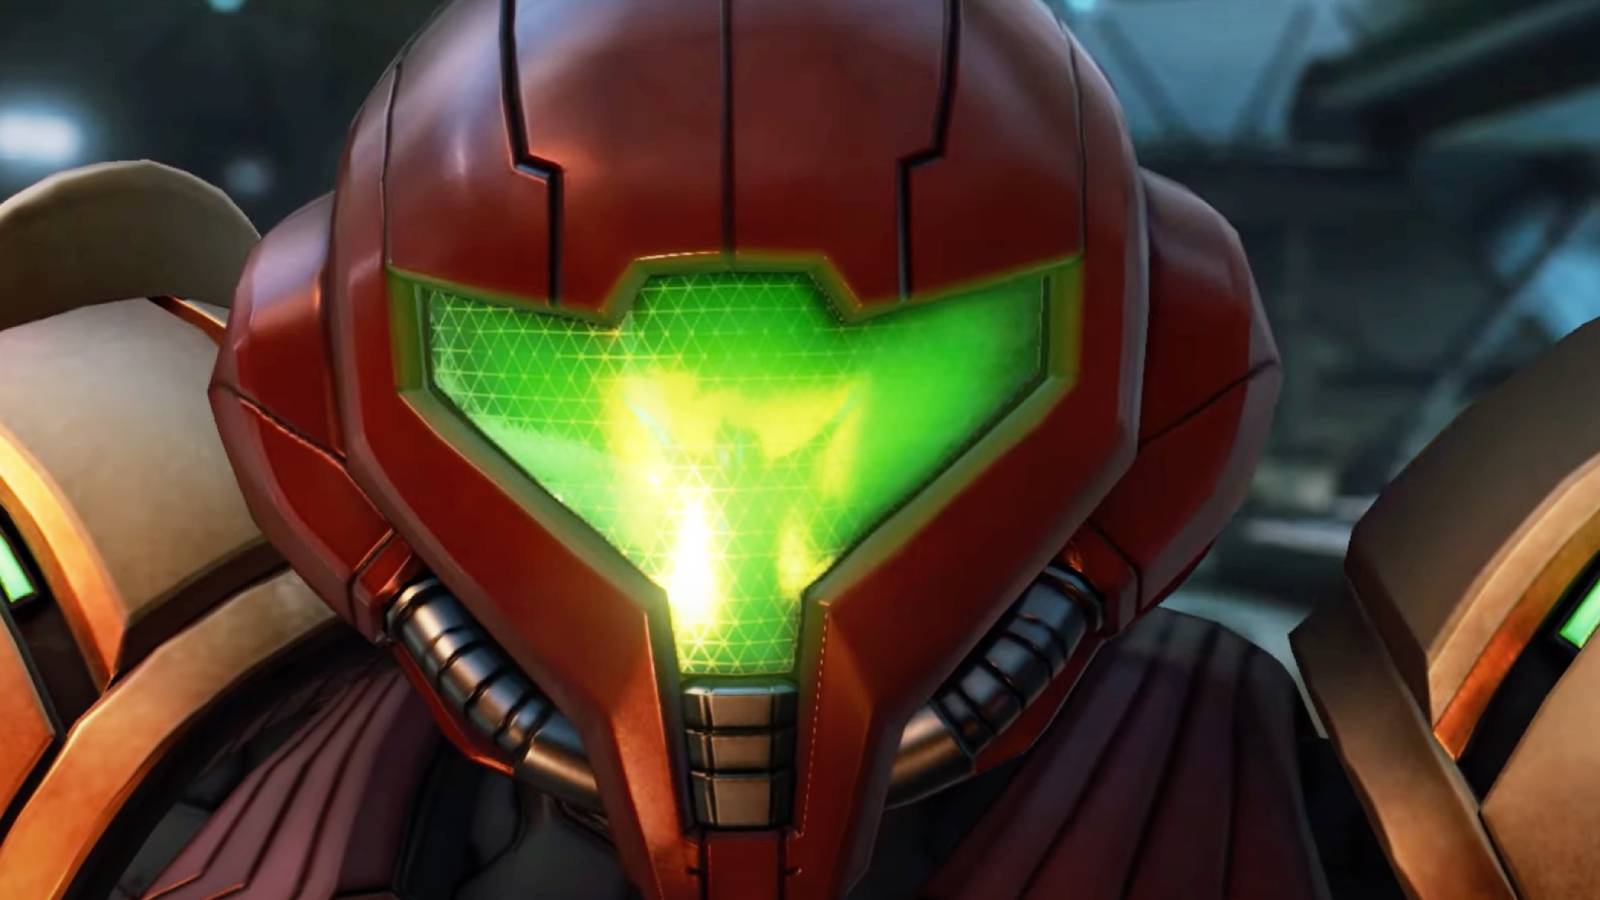 A screenshot from the Metroid Prime 4 trailer shows a close up of Samus Aran looking towards the camera